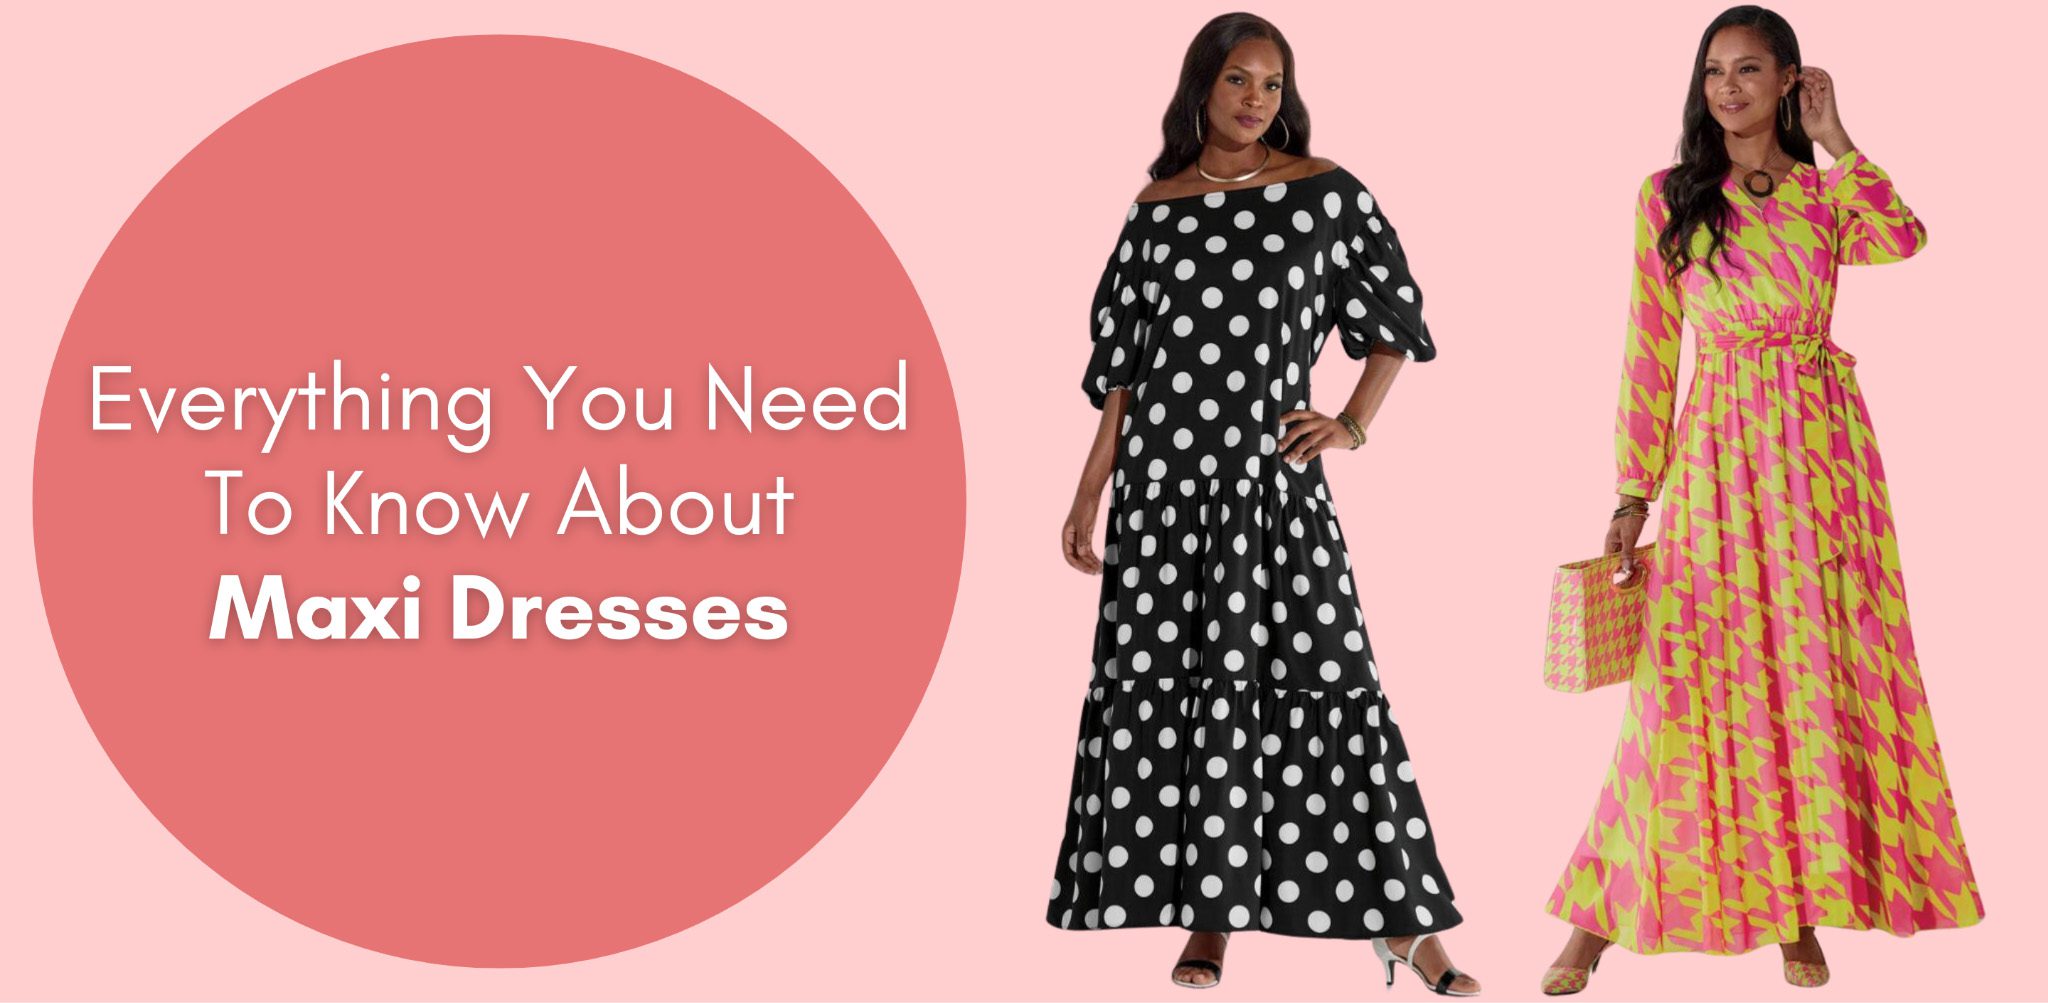 Everything You Need To Know About Maxi Dresses